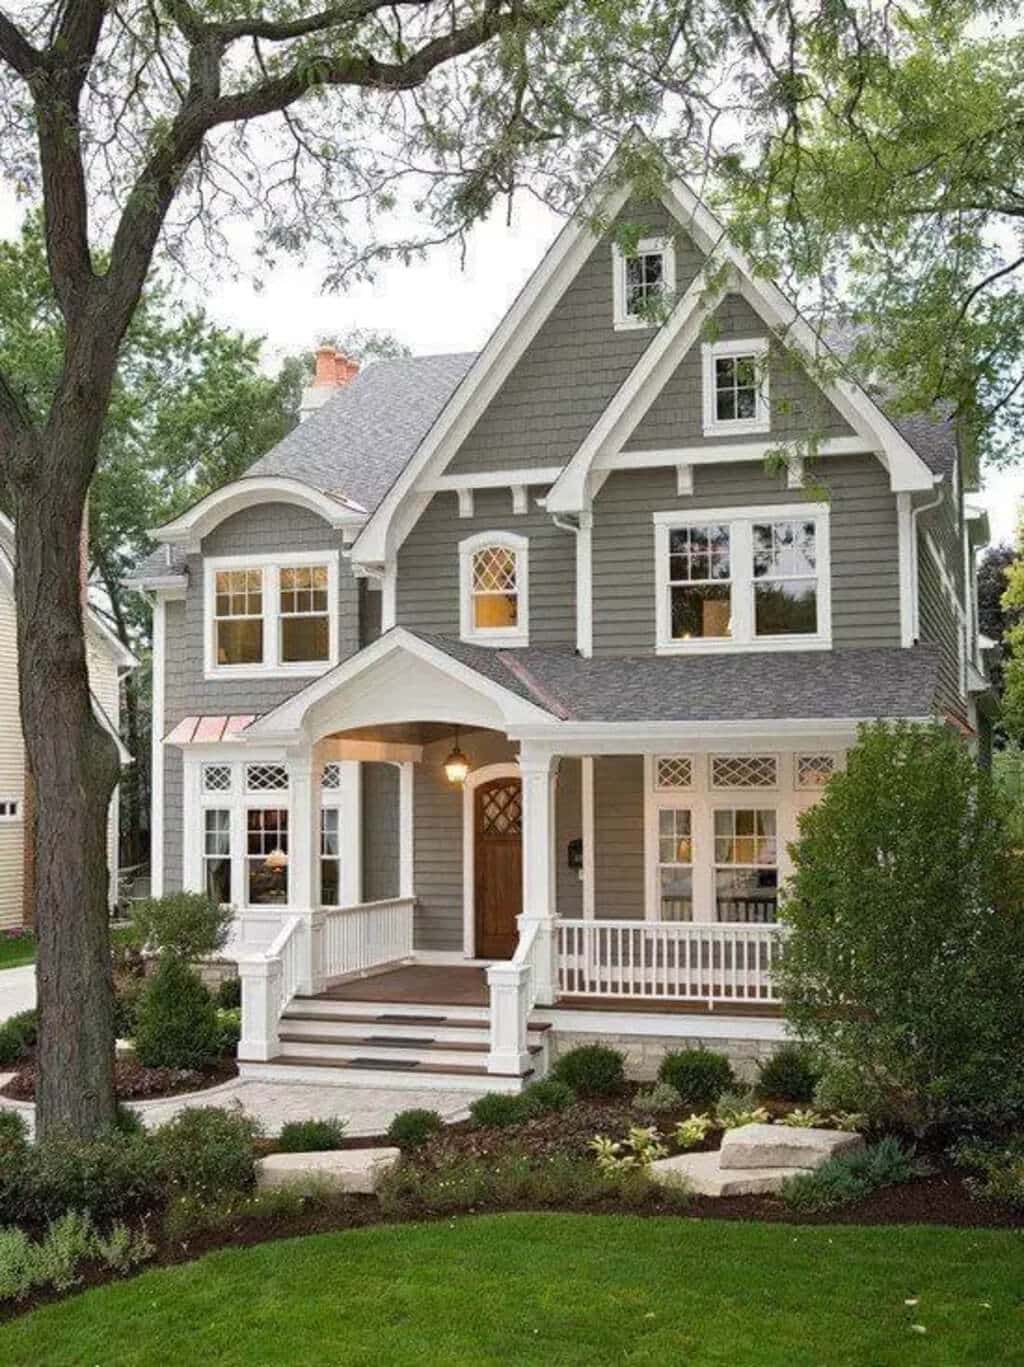 Muted Green + White + Grey exterior house color schemes